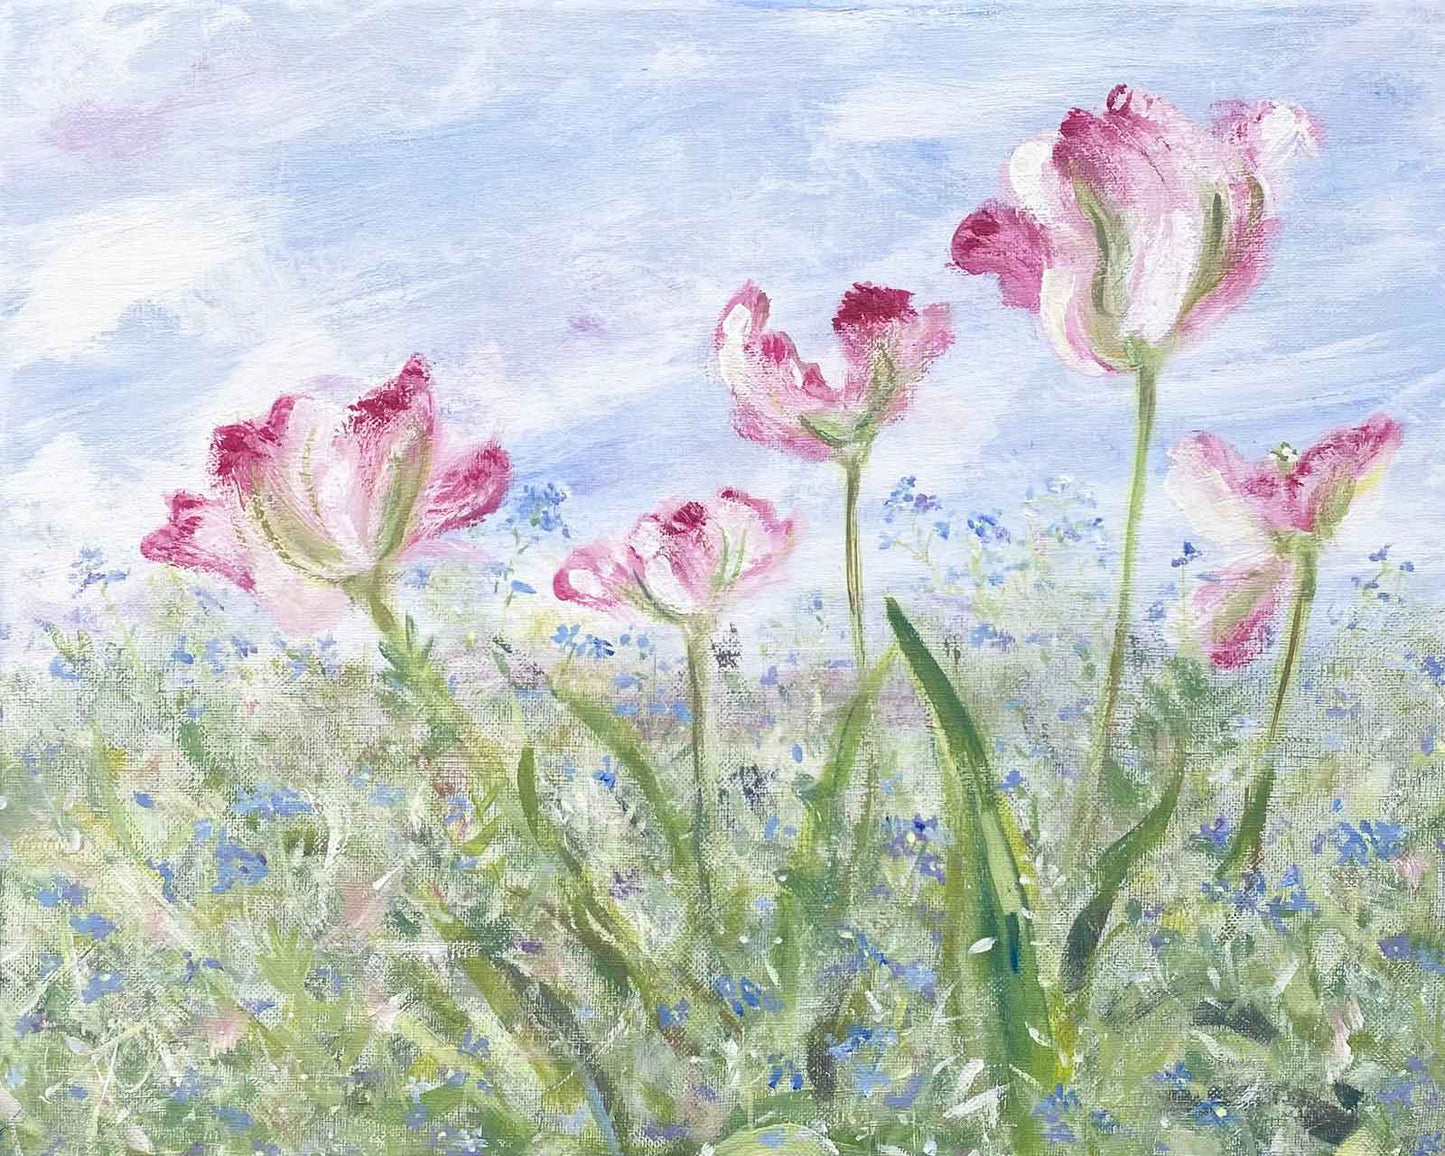 Softly coloured painting of pink, white and green tulips growing amidst forget-me-nots